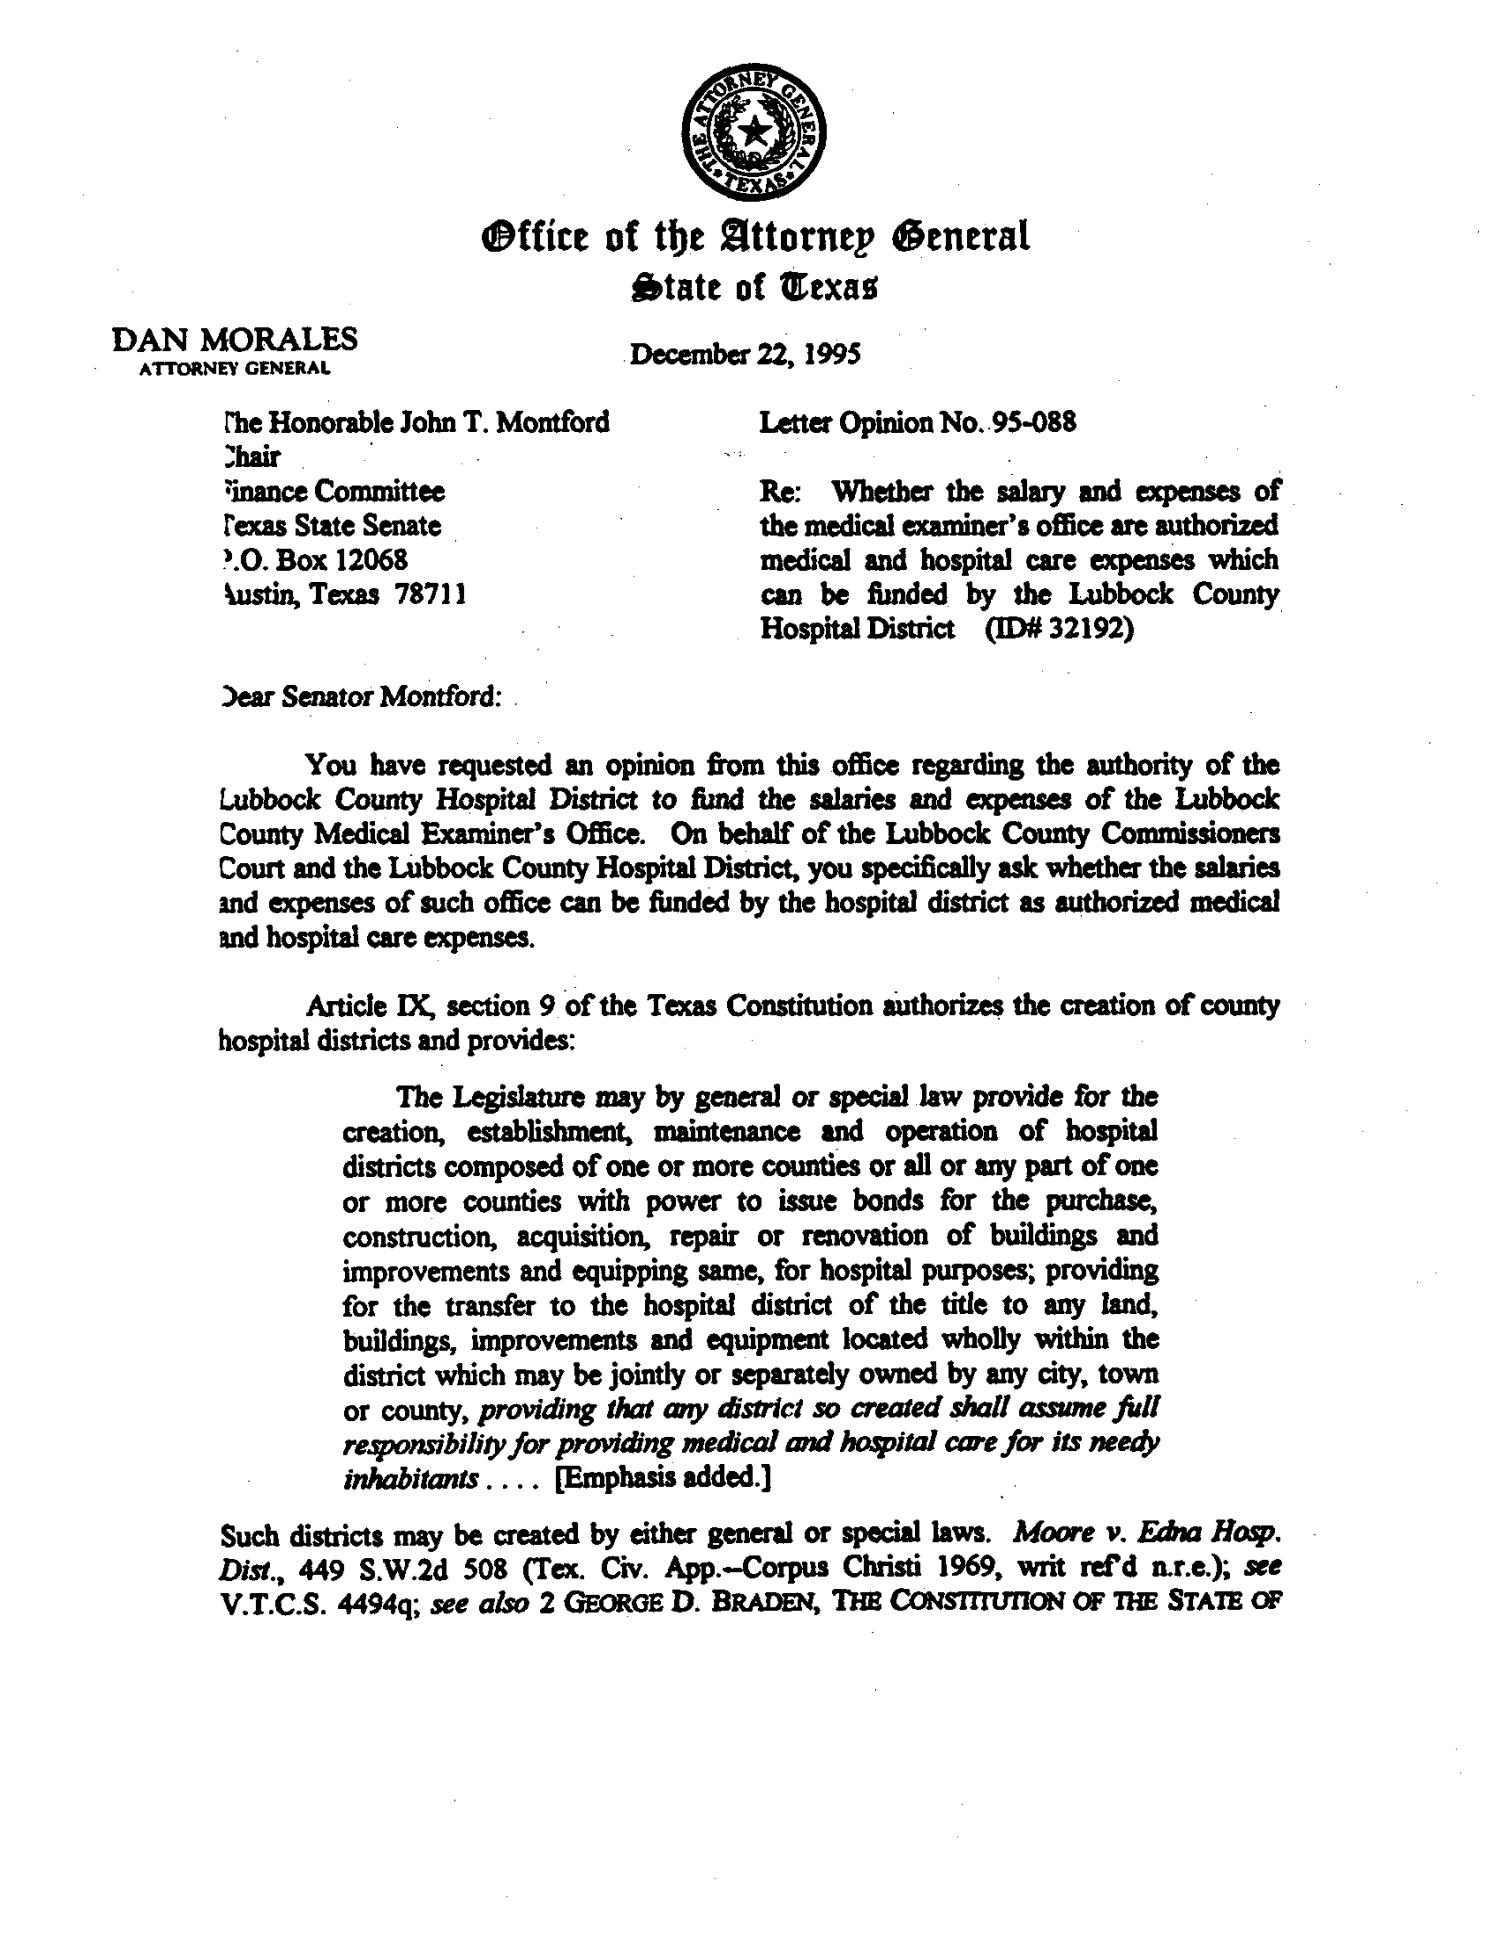 Texas Attorney General Opinion: LO95-088
                                                
                                                    [Sequence #]: 1 of 4
                                                